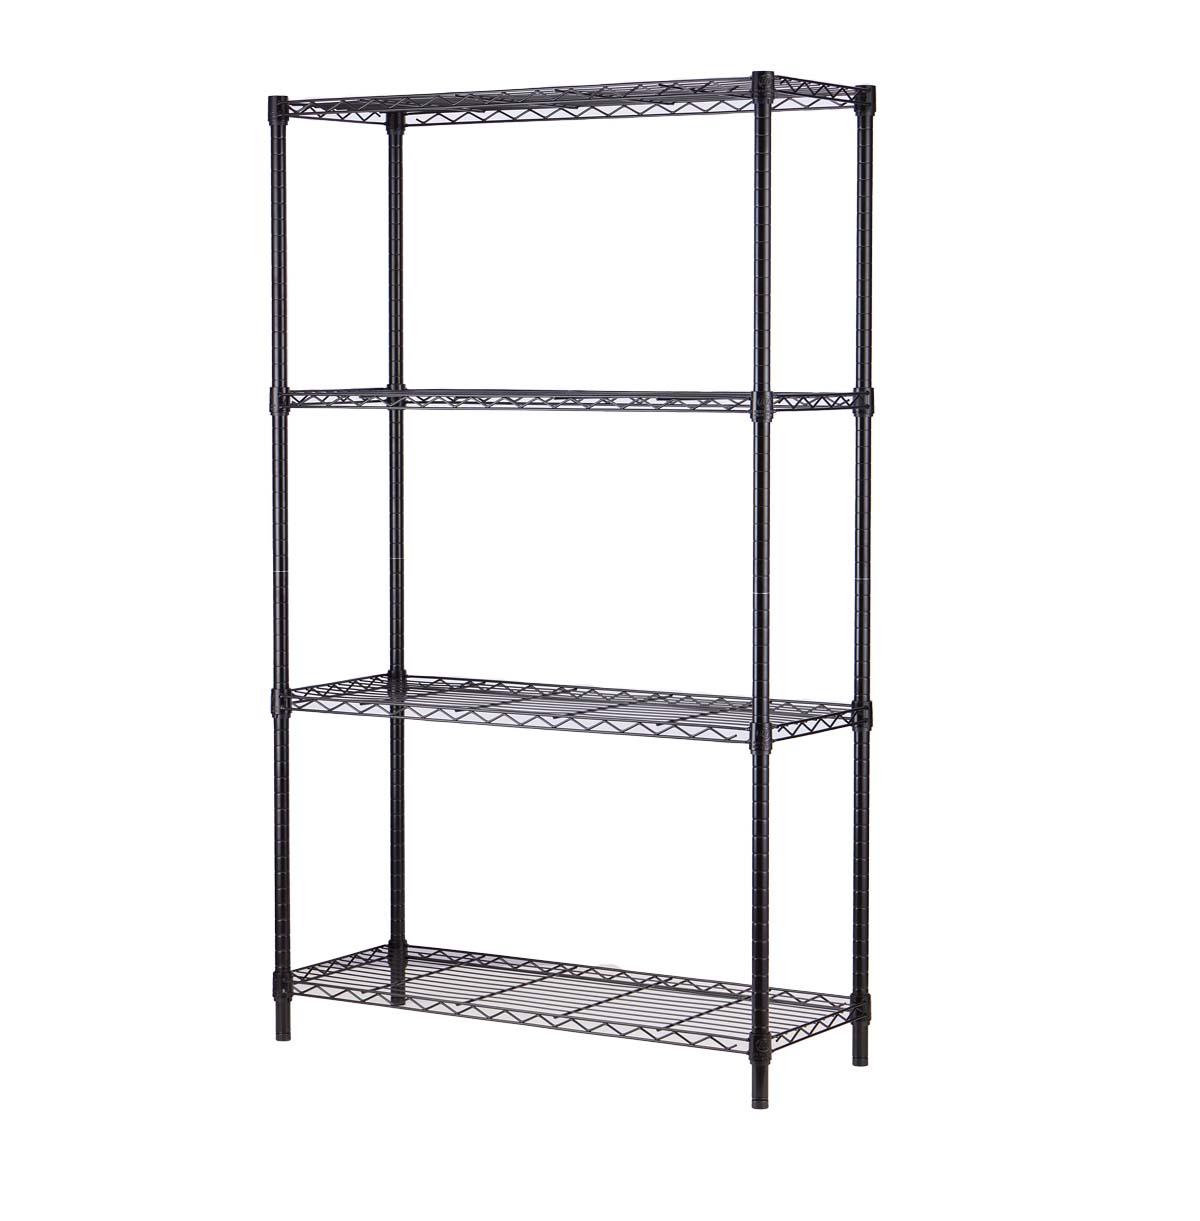 4-Tier Wire Storage Racks For Pantry / Steel Organizer Wire Rack / Utility Shelving Unit / Black Wire Shelving Unit